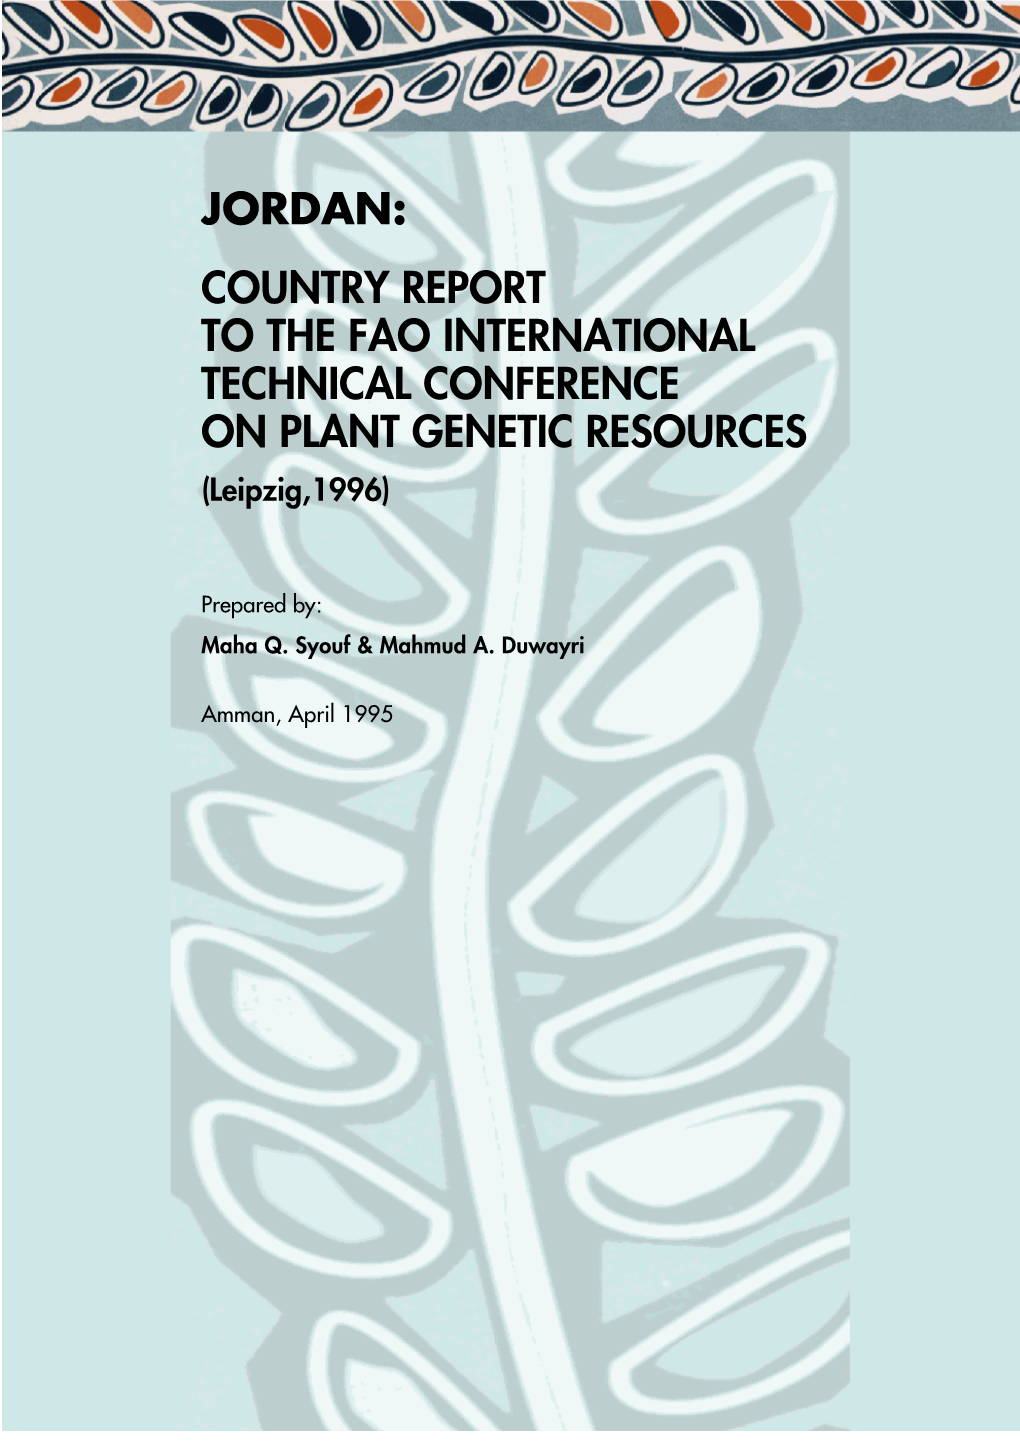 JORDAN: COUNTRY REPORT to the FAO INTERNATIONAL TECHNICAL CONFERENCE on PLANT GENETIC RESOURCES (Leipzig,1996)